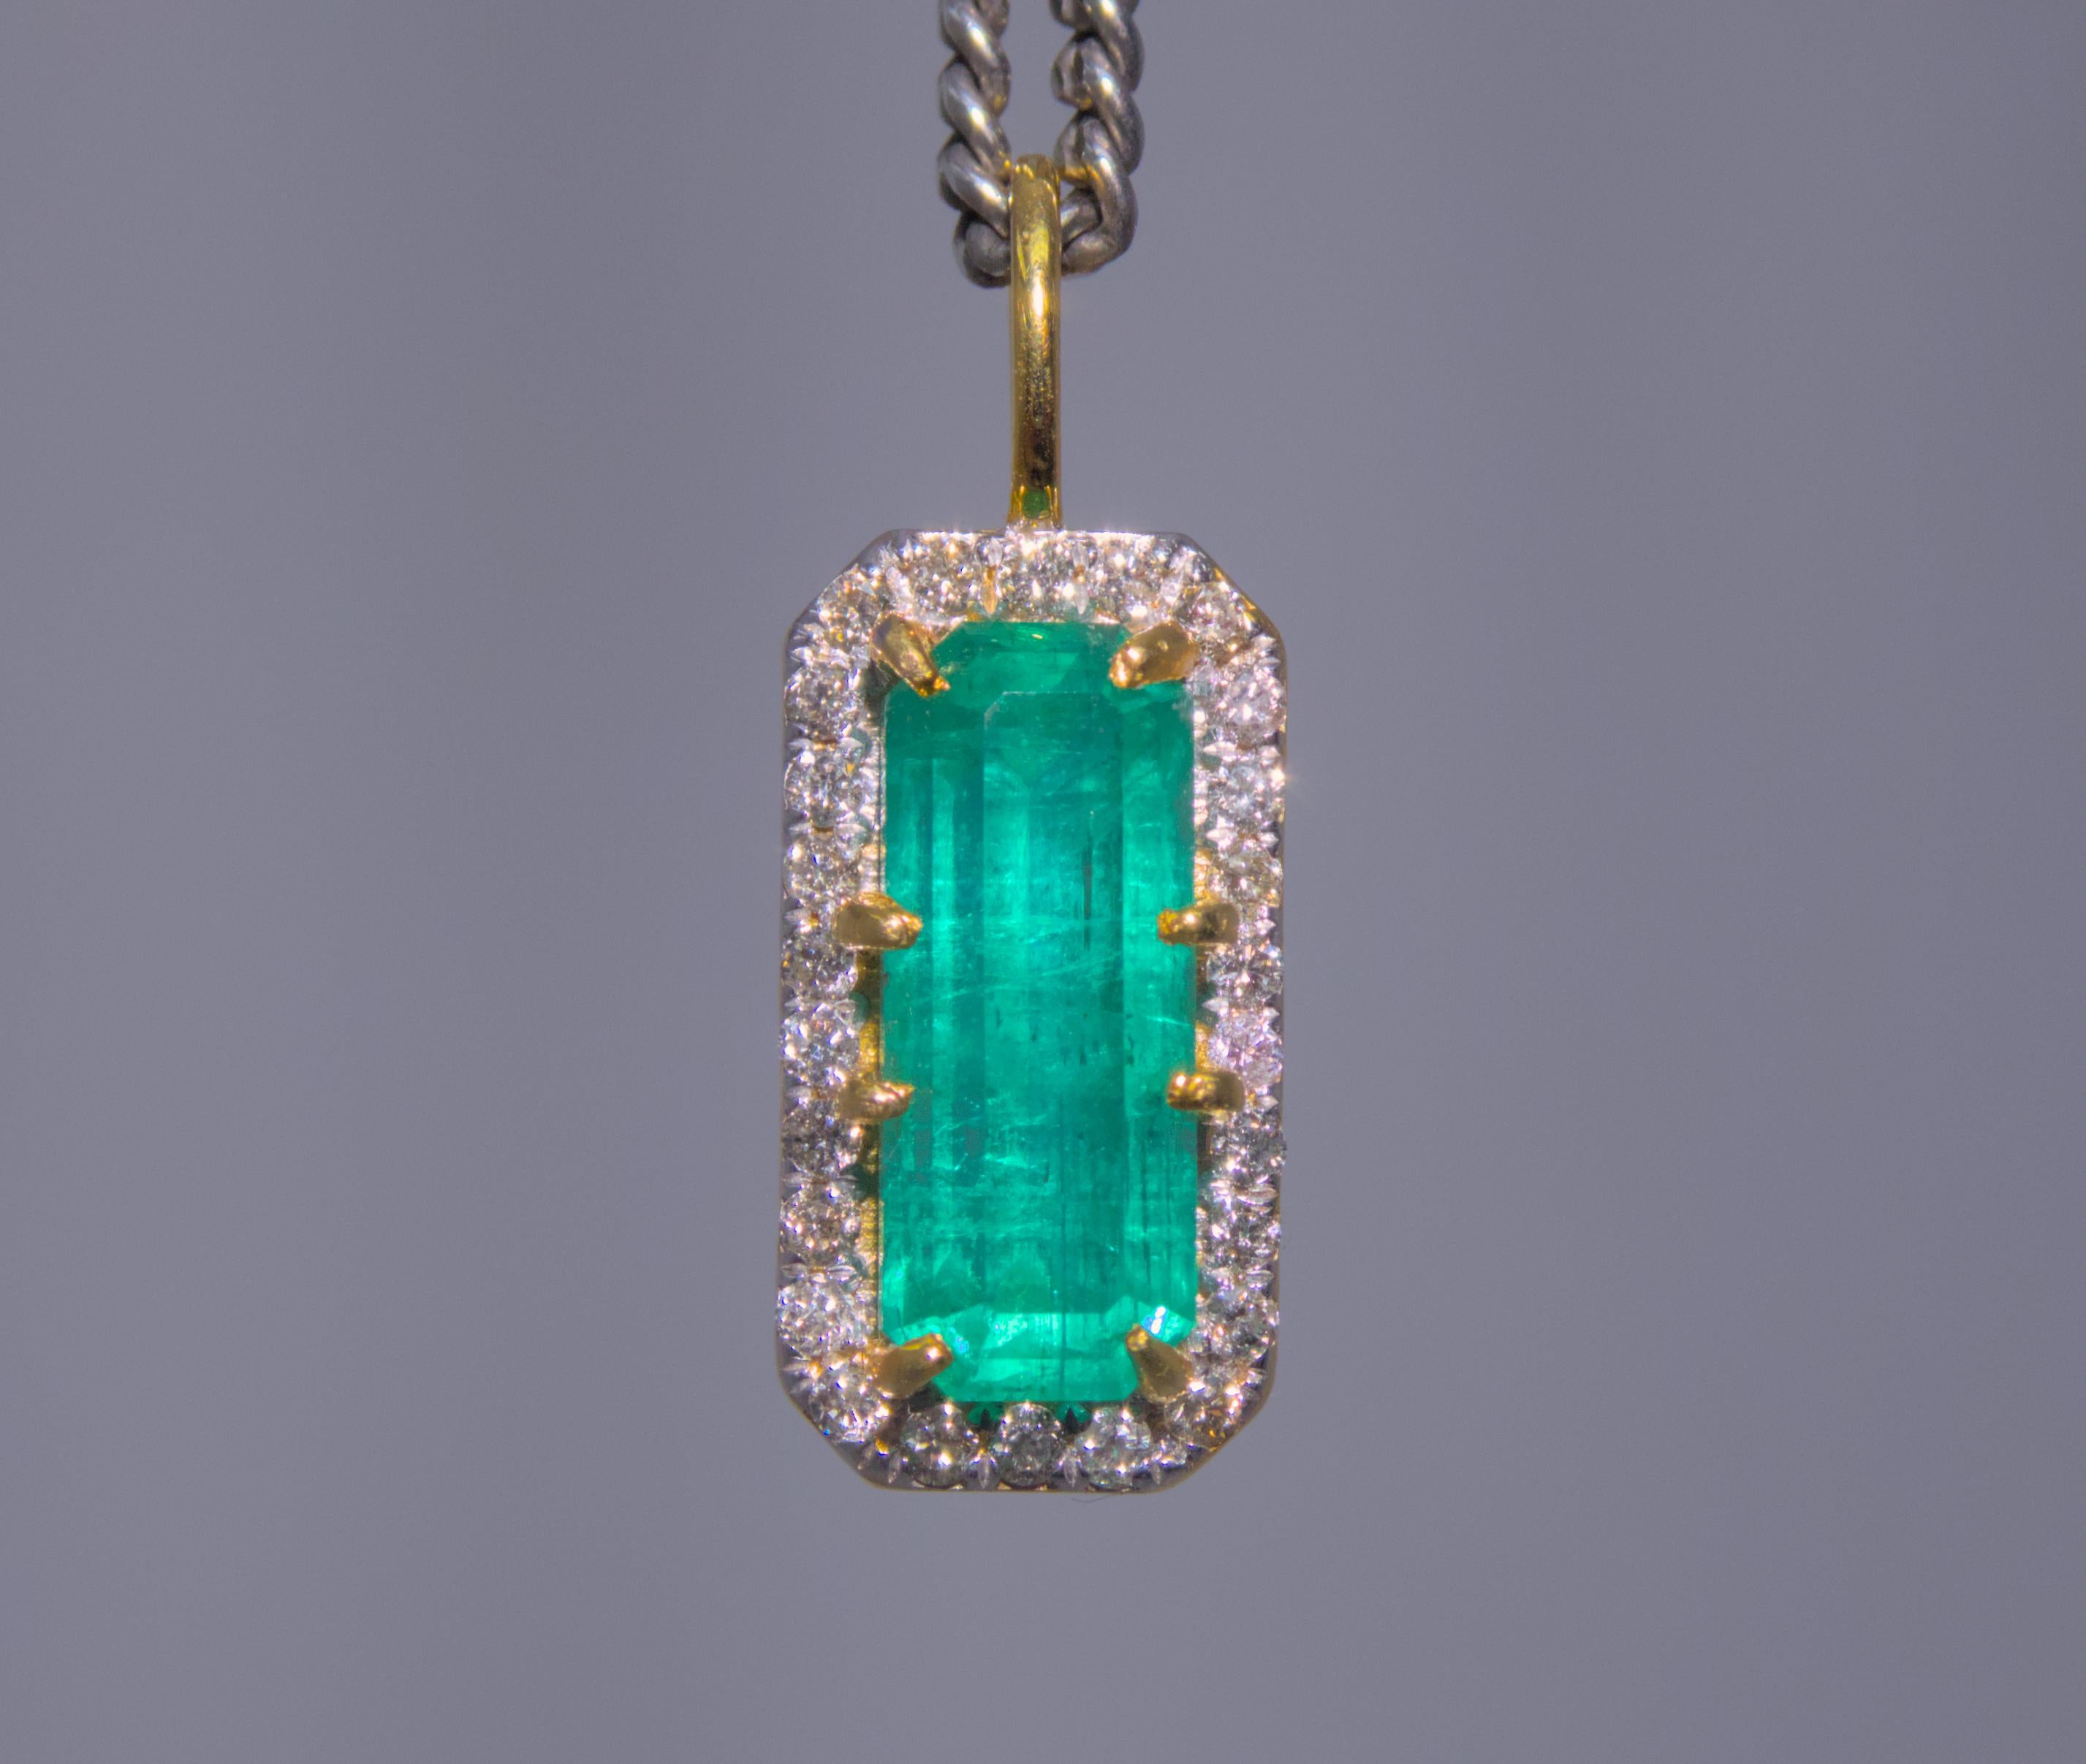 Our stunning Afghan emerald pendant features a 4.72-carat natural emerald surrounded by a sparkling halo of 0.42 carat diamonds. Expertly crafted in 18k yellow gold, this pendant exudes timeless elegance and is the perfect addition to any jewelry